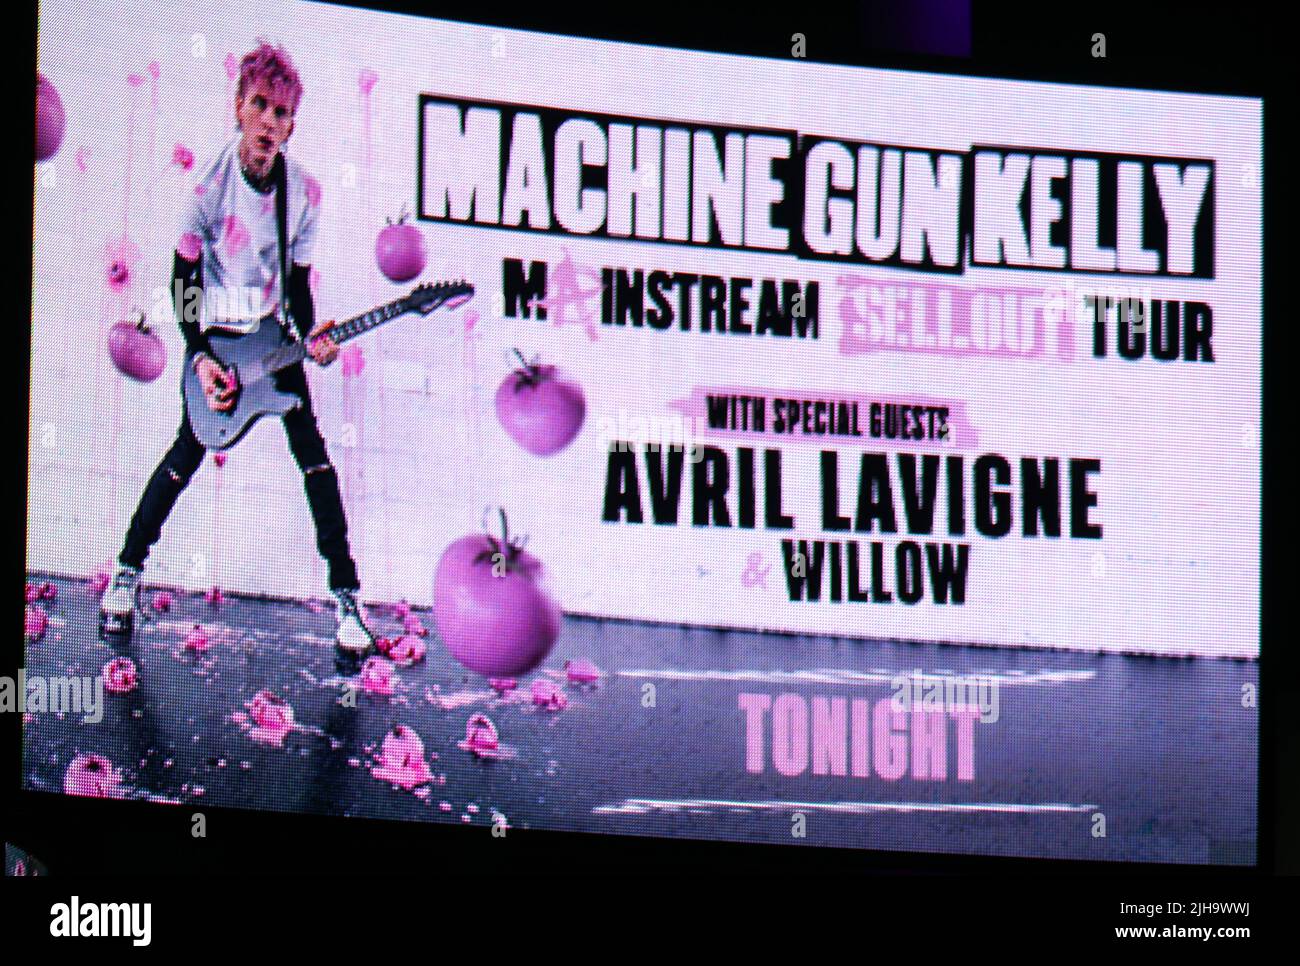 Inglewood, California, USA 13th July 2022 Machine Gun Kelly and Avril Lavigne Mainstream Sellout Tour Concert Marquee at Kia Forum on July 13, 2022 in Inglewood, California, USA. Photo by Barry King/Alamy Stock Photo Stock Photo